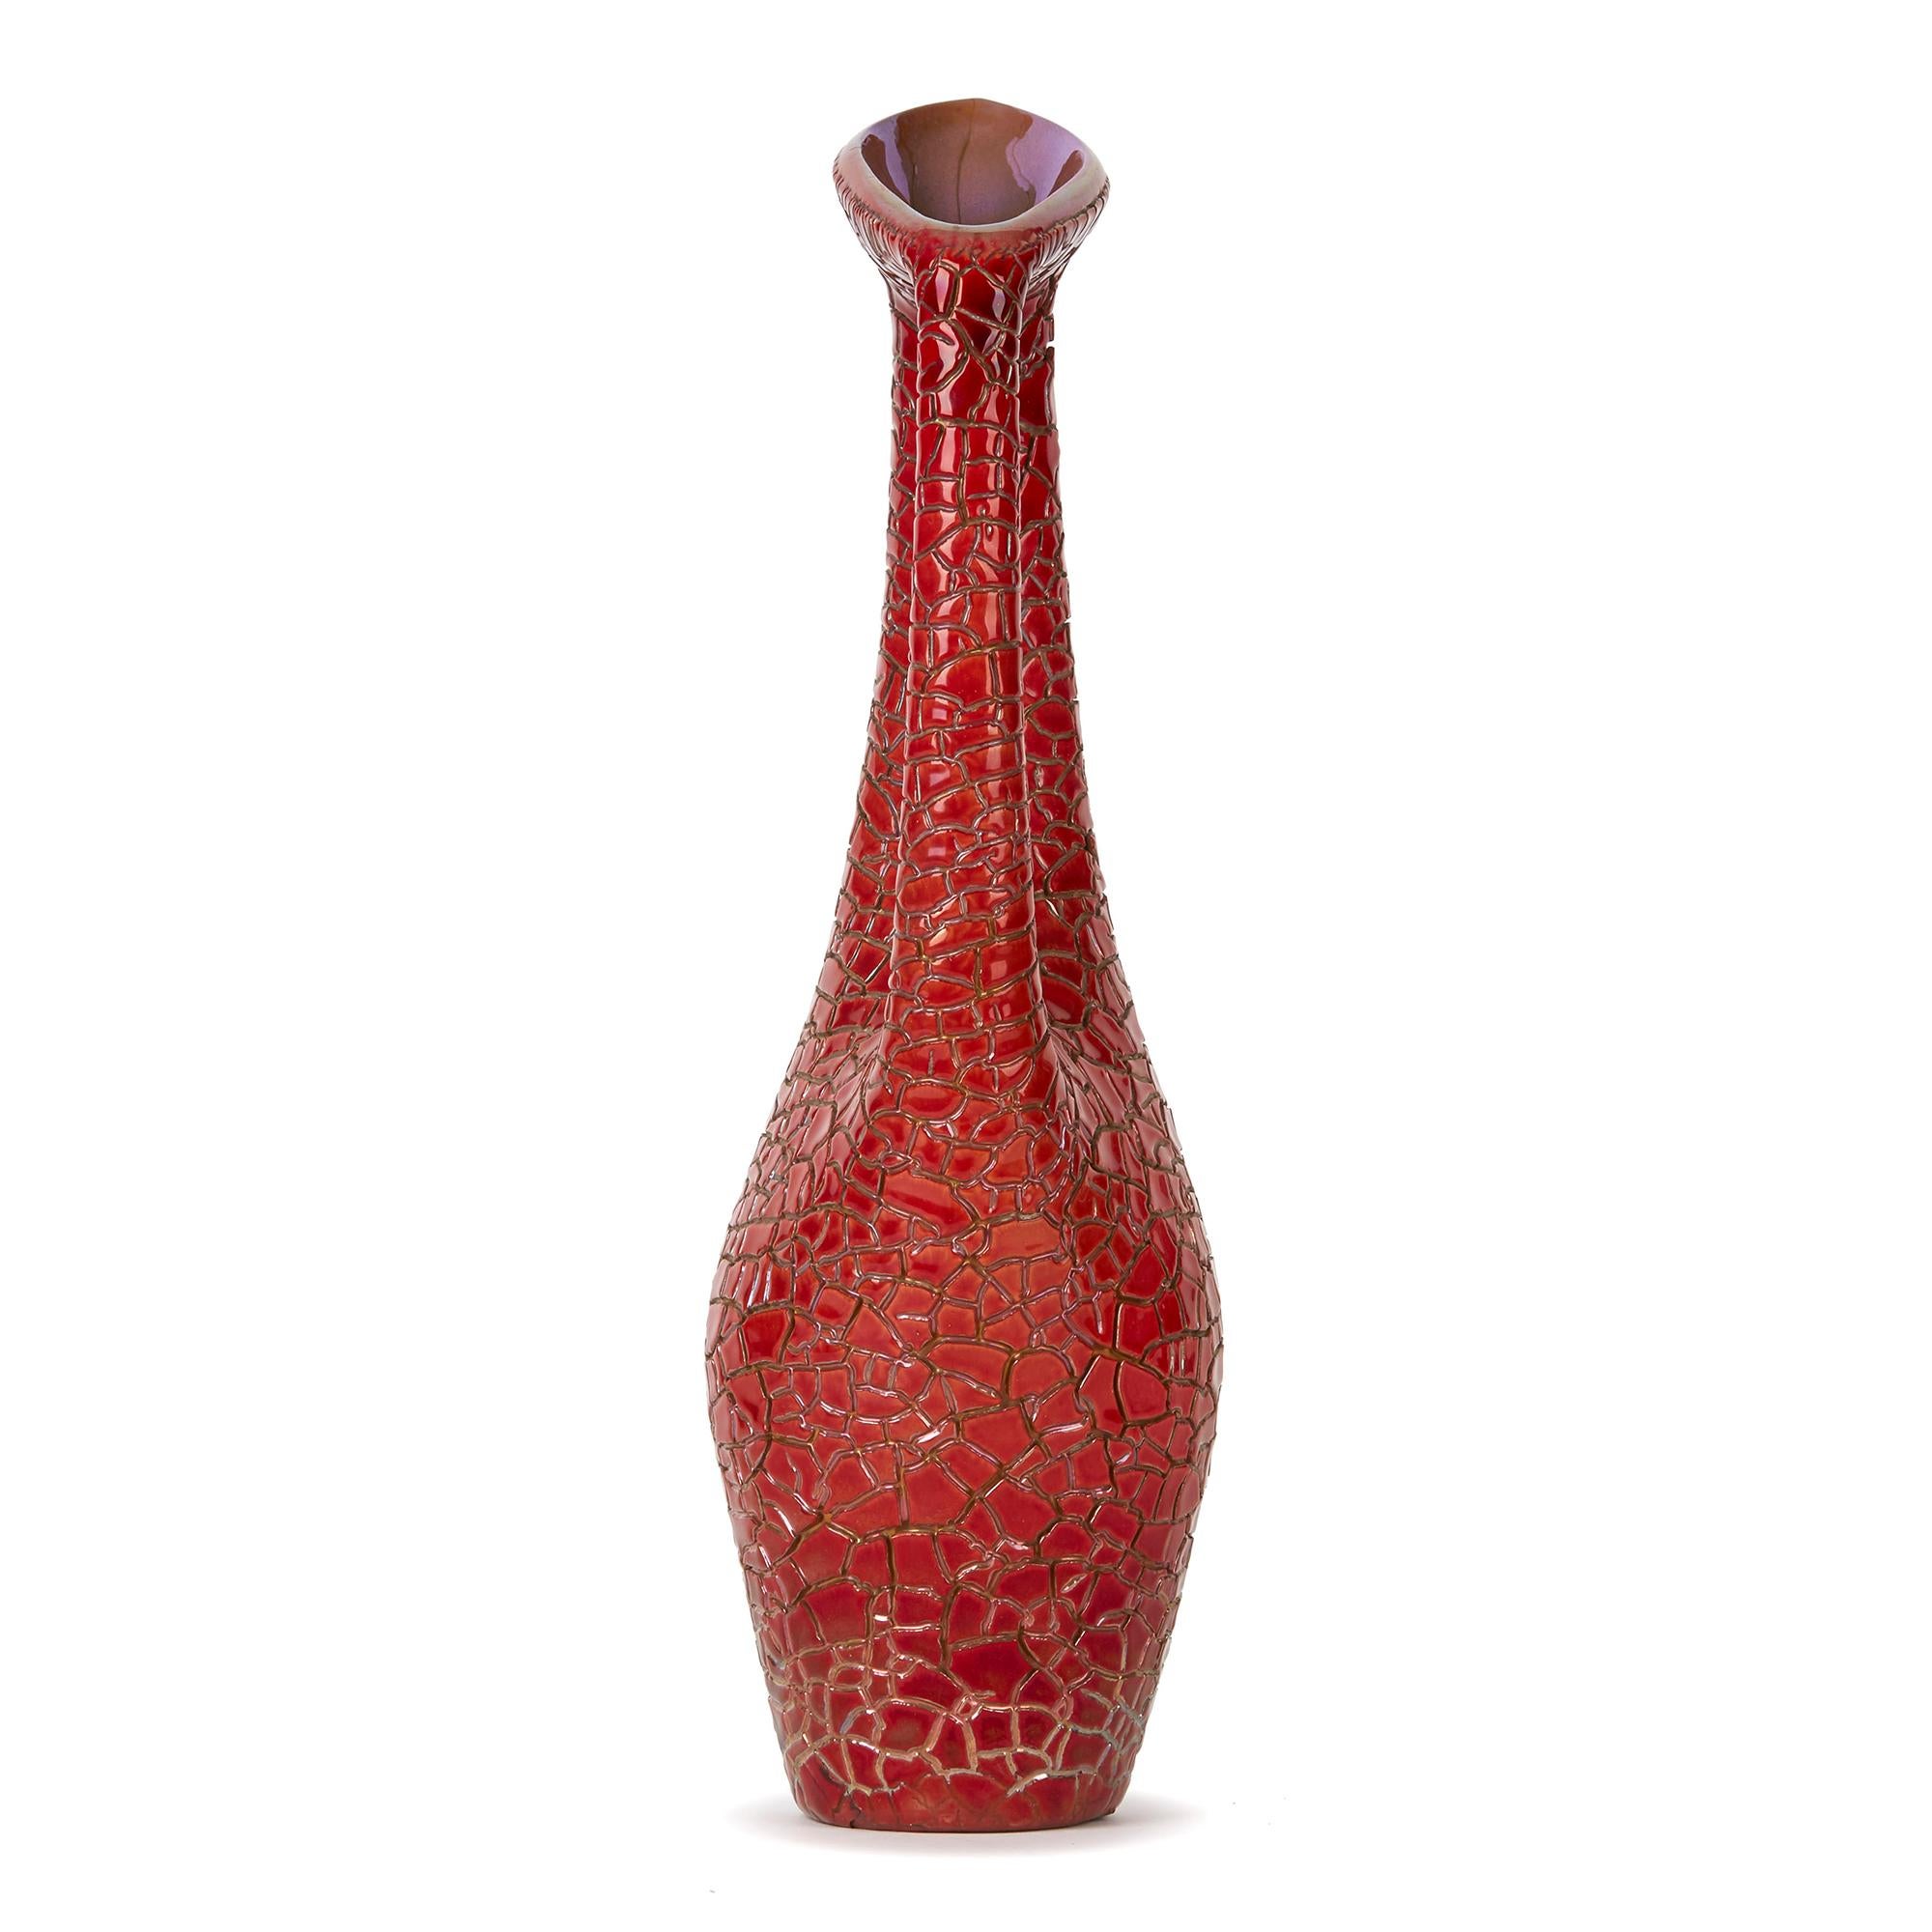 PLEASE NOTE: This piece is currently located in our Amsterdam office, please enquire for delivery times. 

A stylish midcentury handled jug-vase the body in a scaled finish and decorated in flambe red eosin glazes. This stunning example was designed